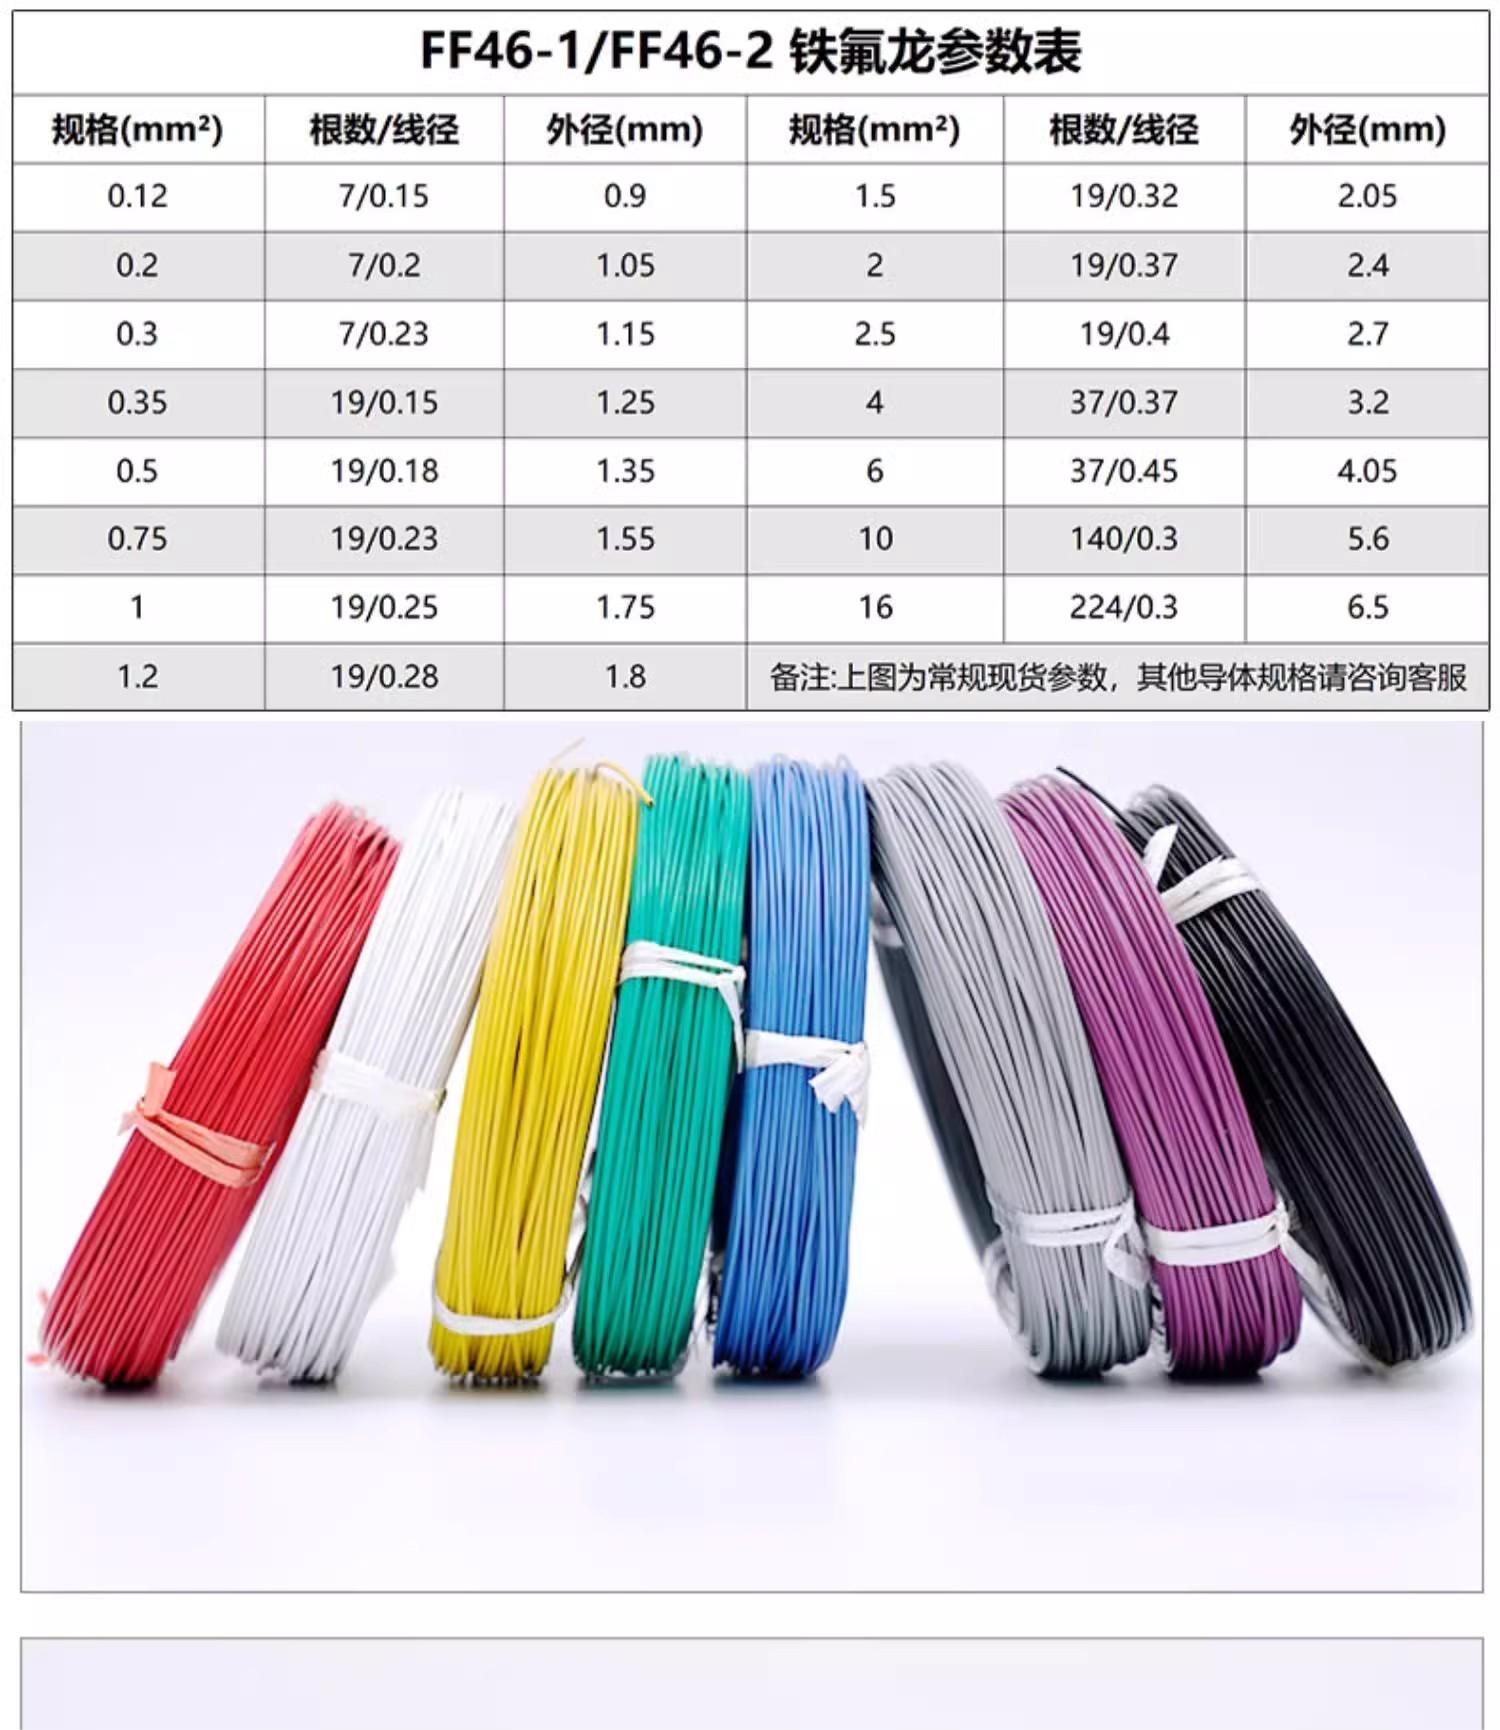 AF200X0.5 square meter LED energy-saving light electric vehicle controller, medical device cable, motor connection cable